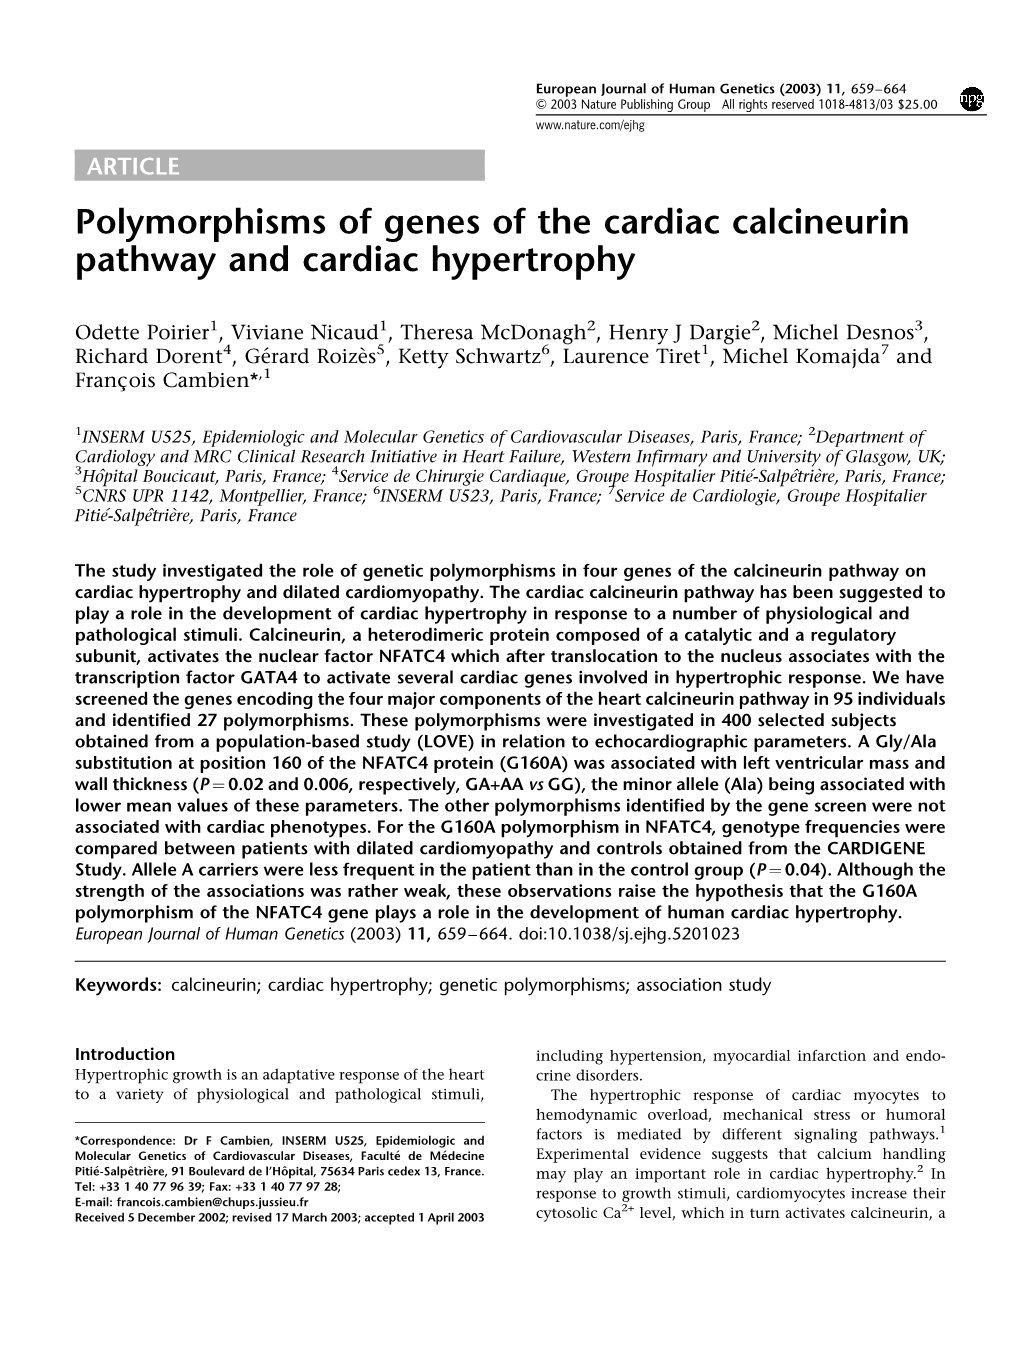 Polymorphisms of Genes of the Cardiac Calcineurin Pathway and Cardiac Hypertrophy